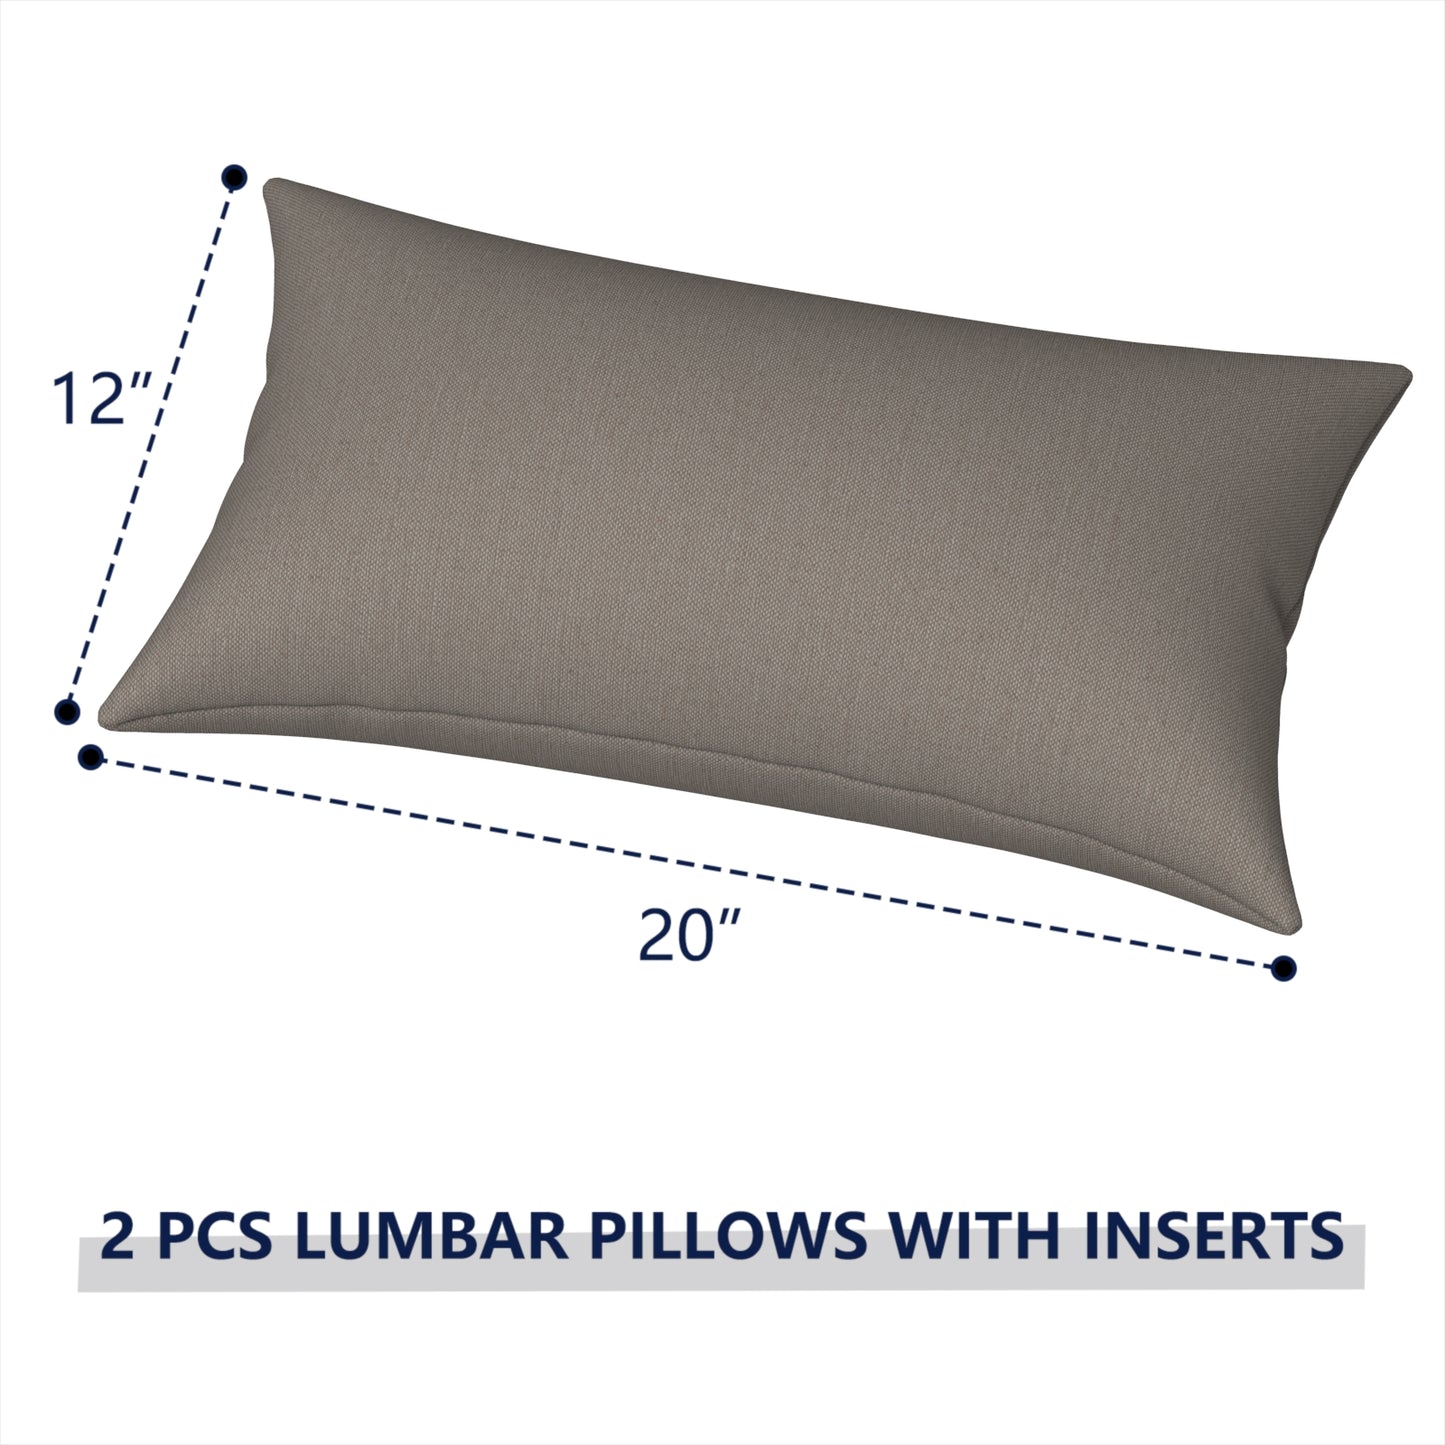 Melody Elephant Outdoor/Indoor Lumbar Pillows, Water Repellent Cushion Pillows, 12x20 Inch, Outdoor Pillows with Inserts for Home Garden, Pack of 2, Dark Grey